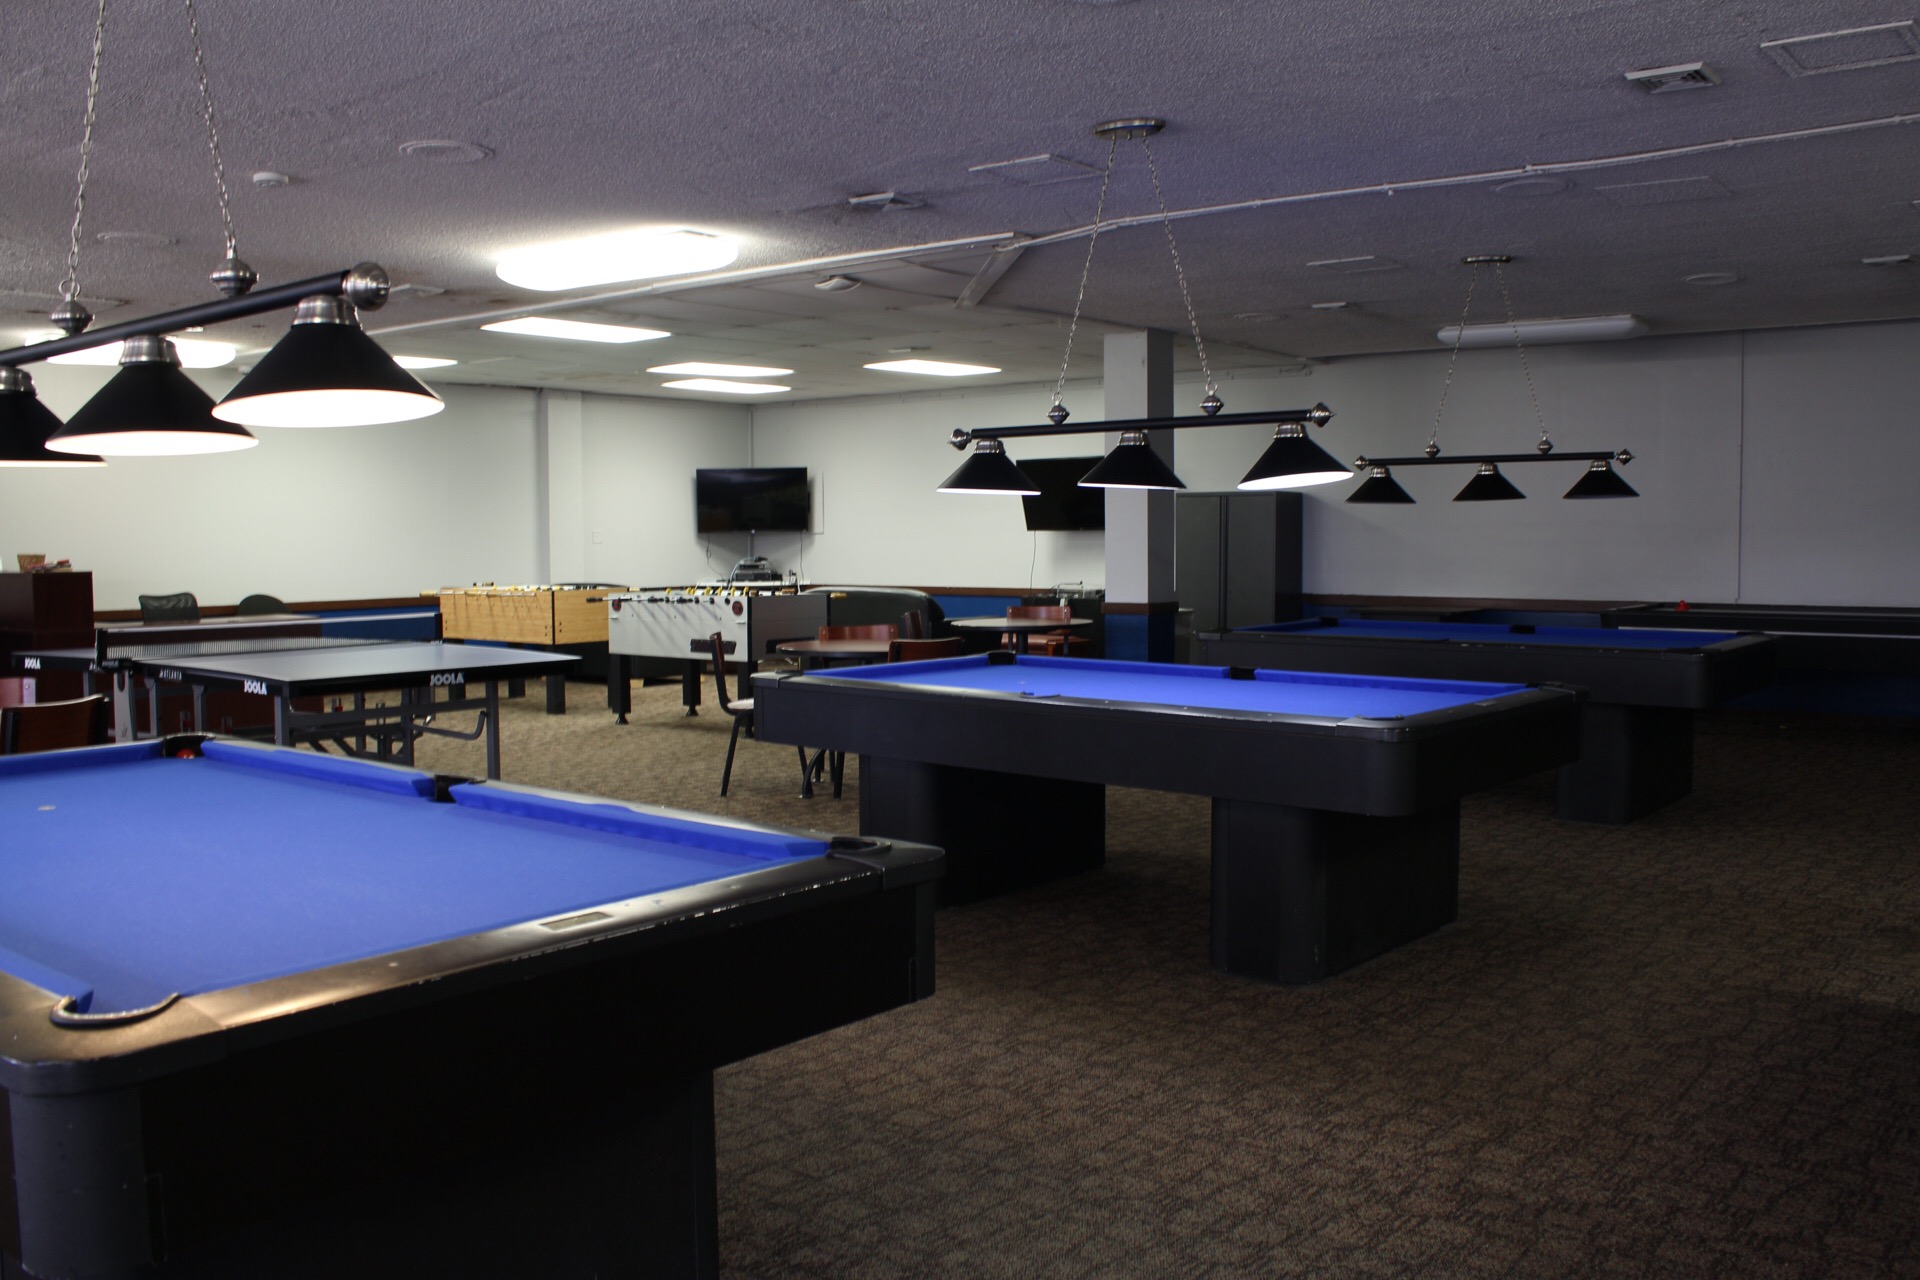 Game Room showing pool tables, ping pong tables and foosball stations.